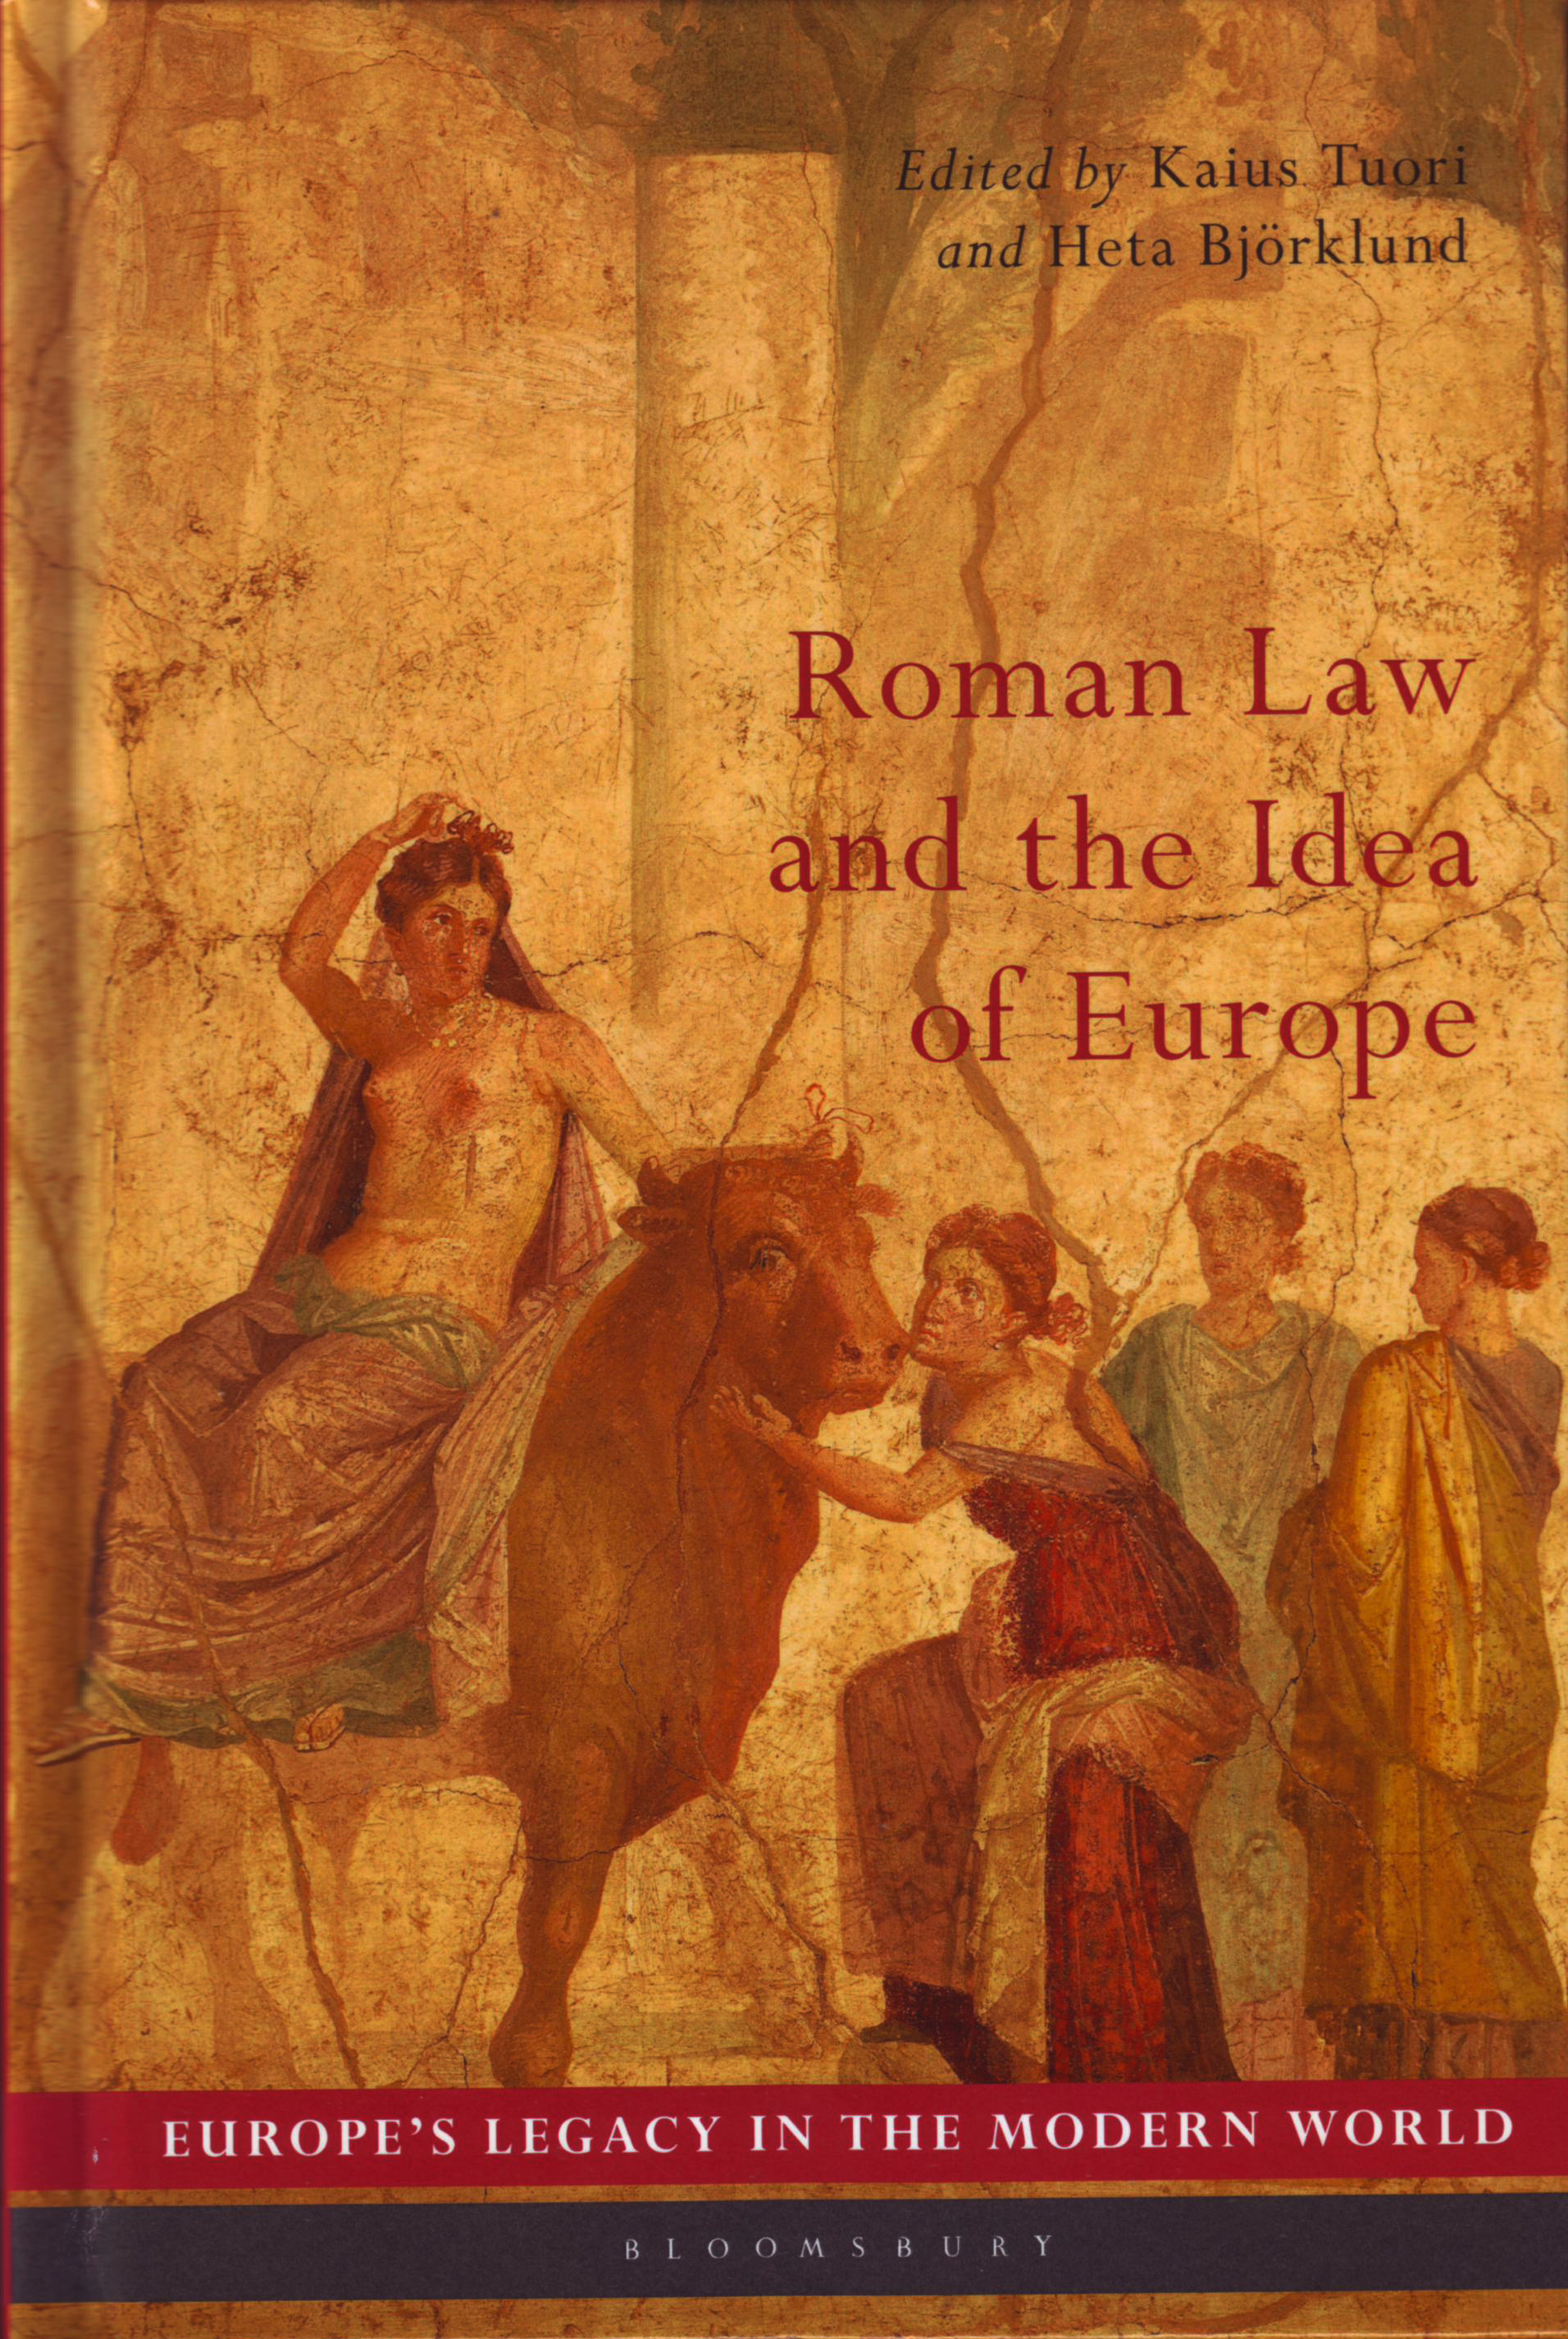 Roman Law and the Idea of Europe